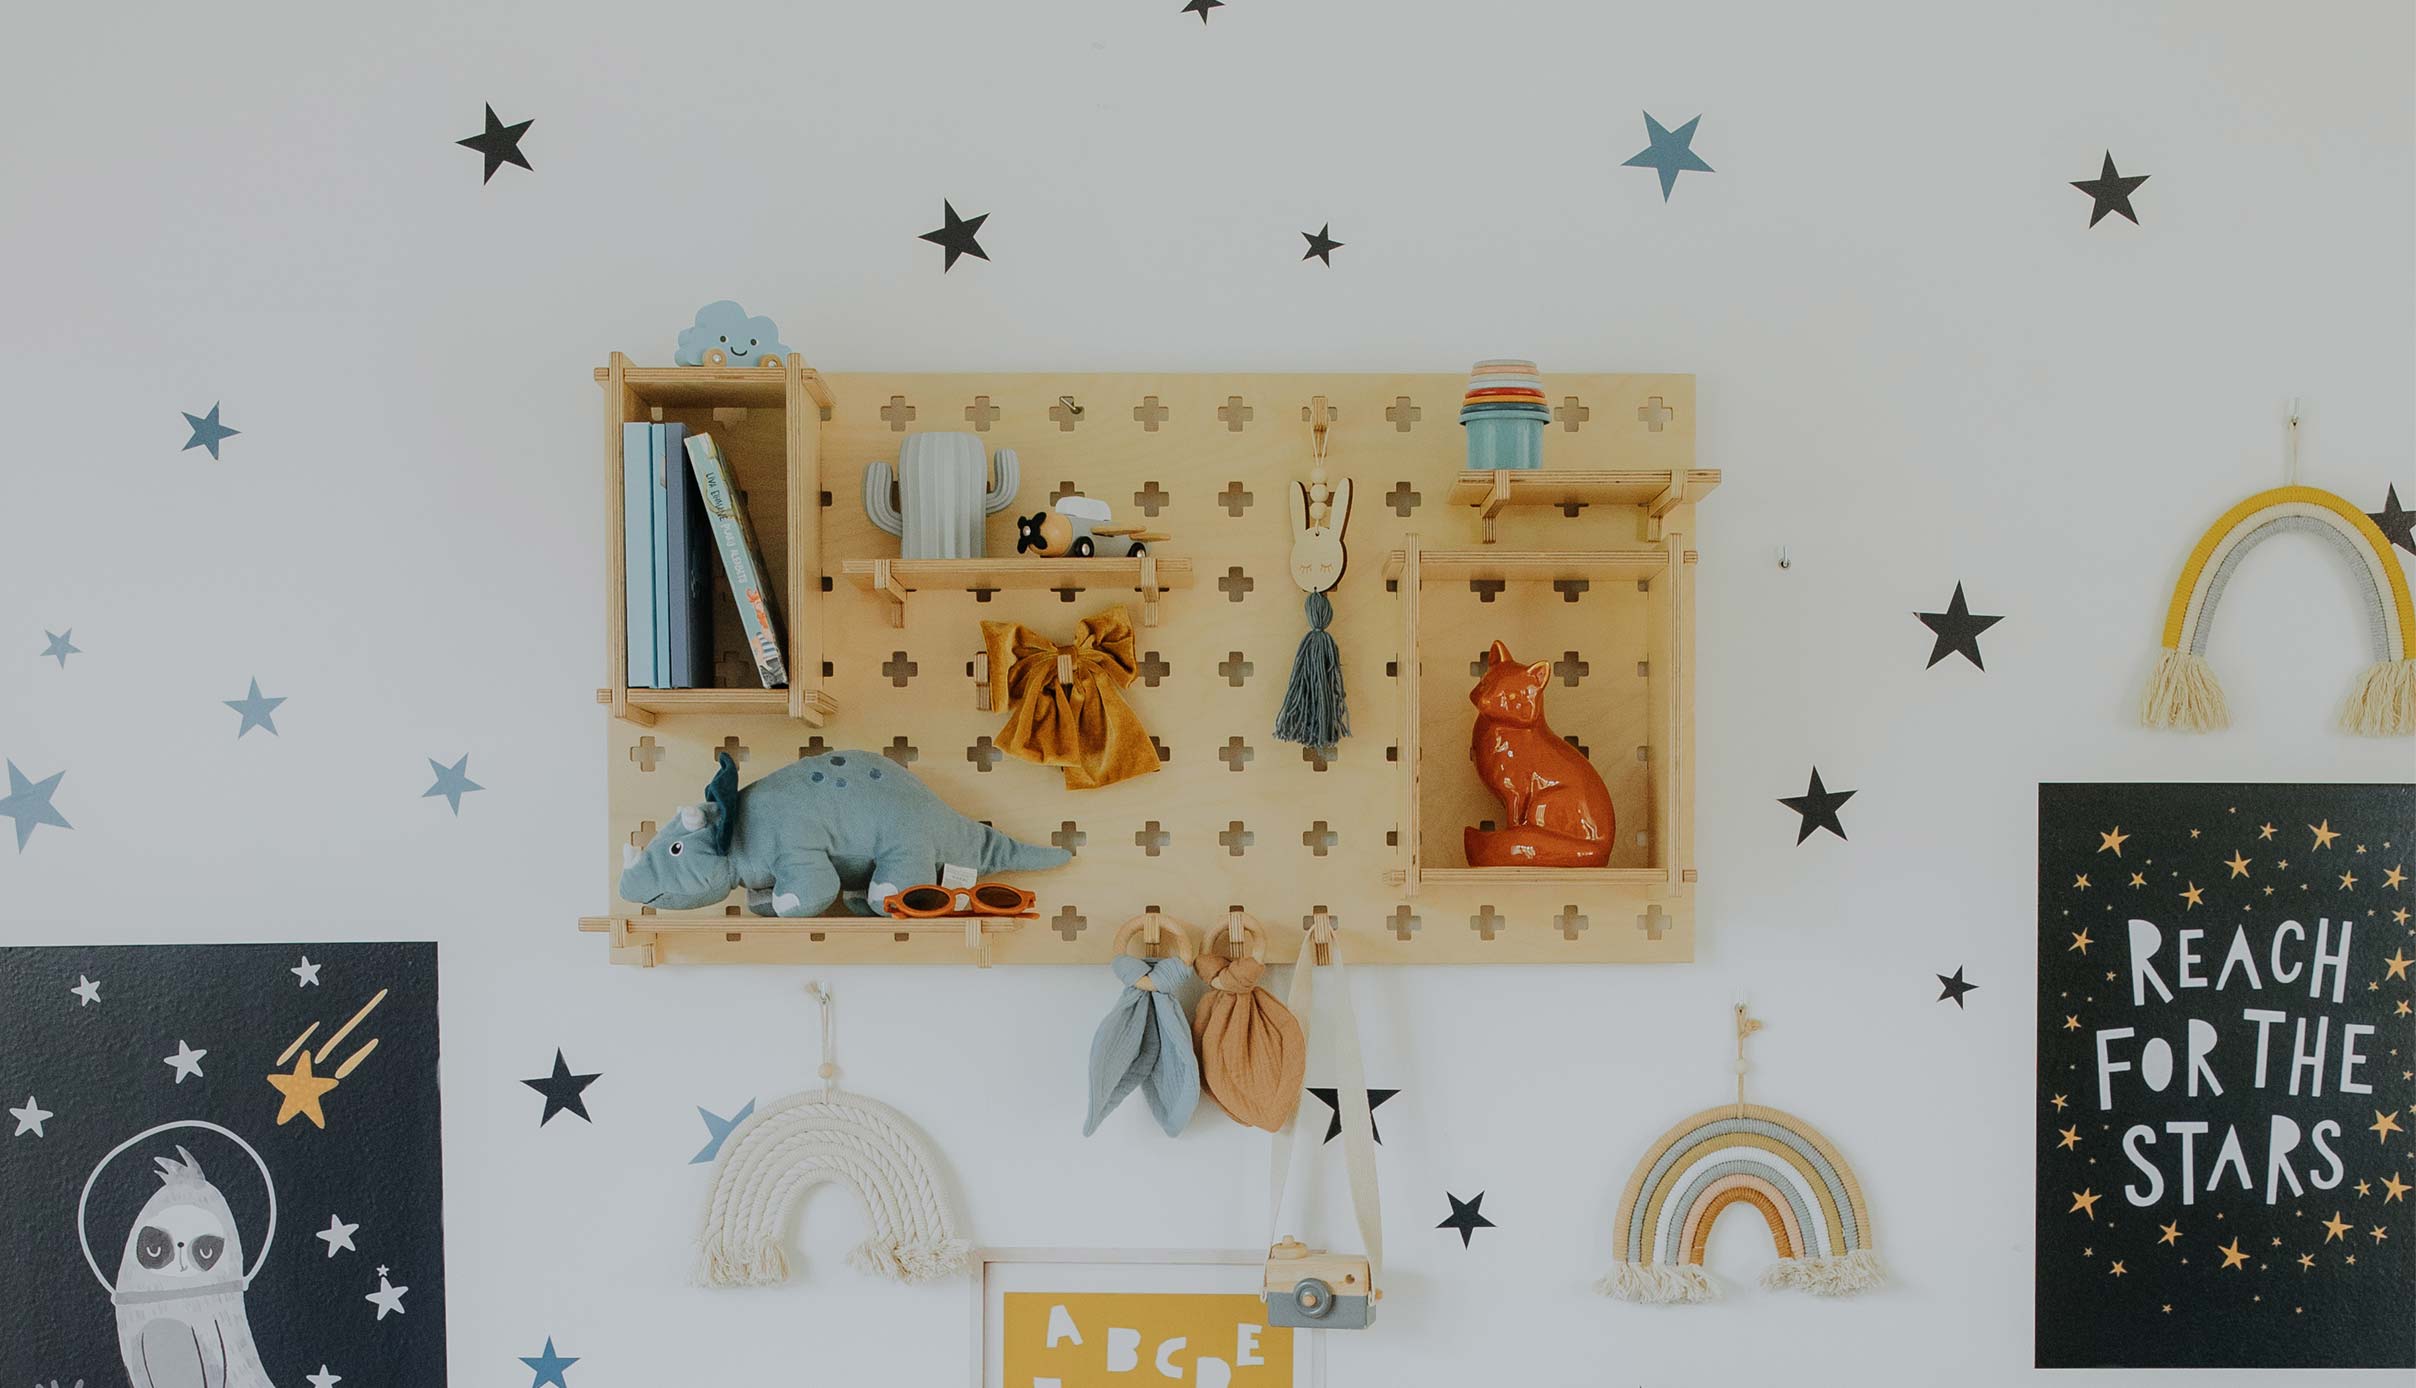 A child's room decorated with stars and stars.